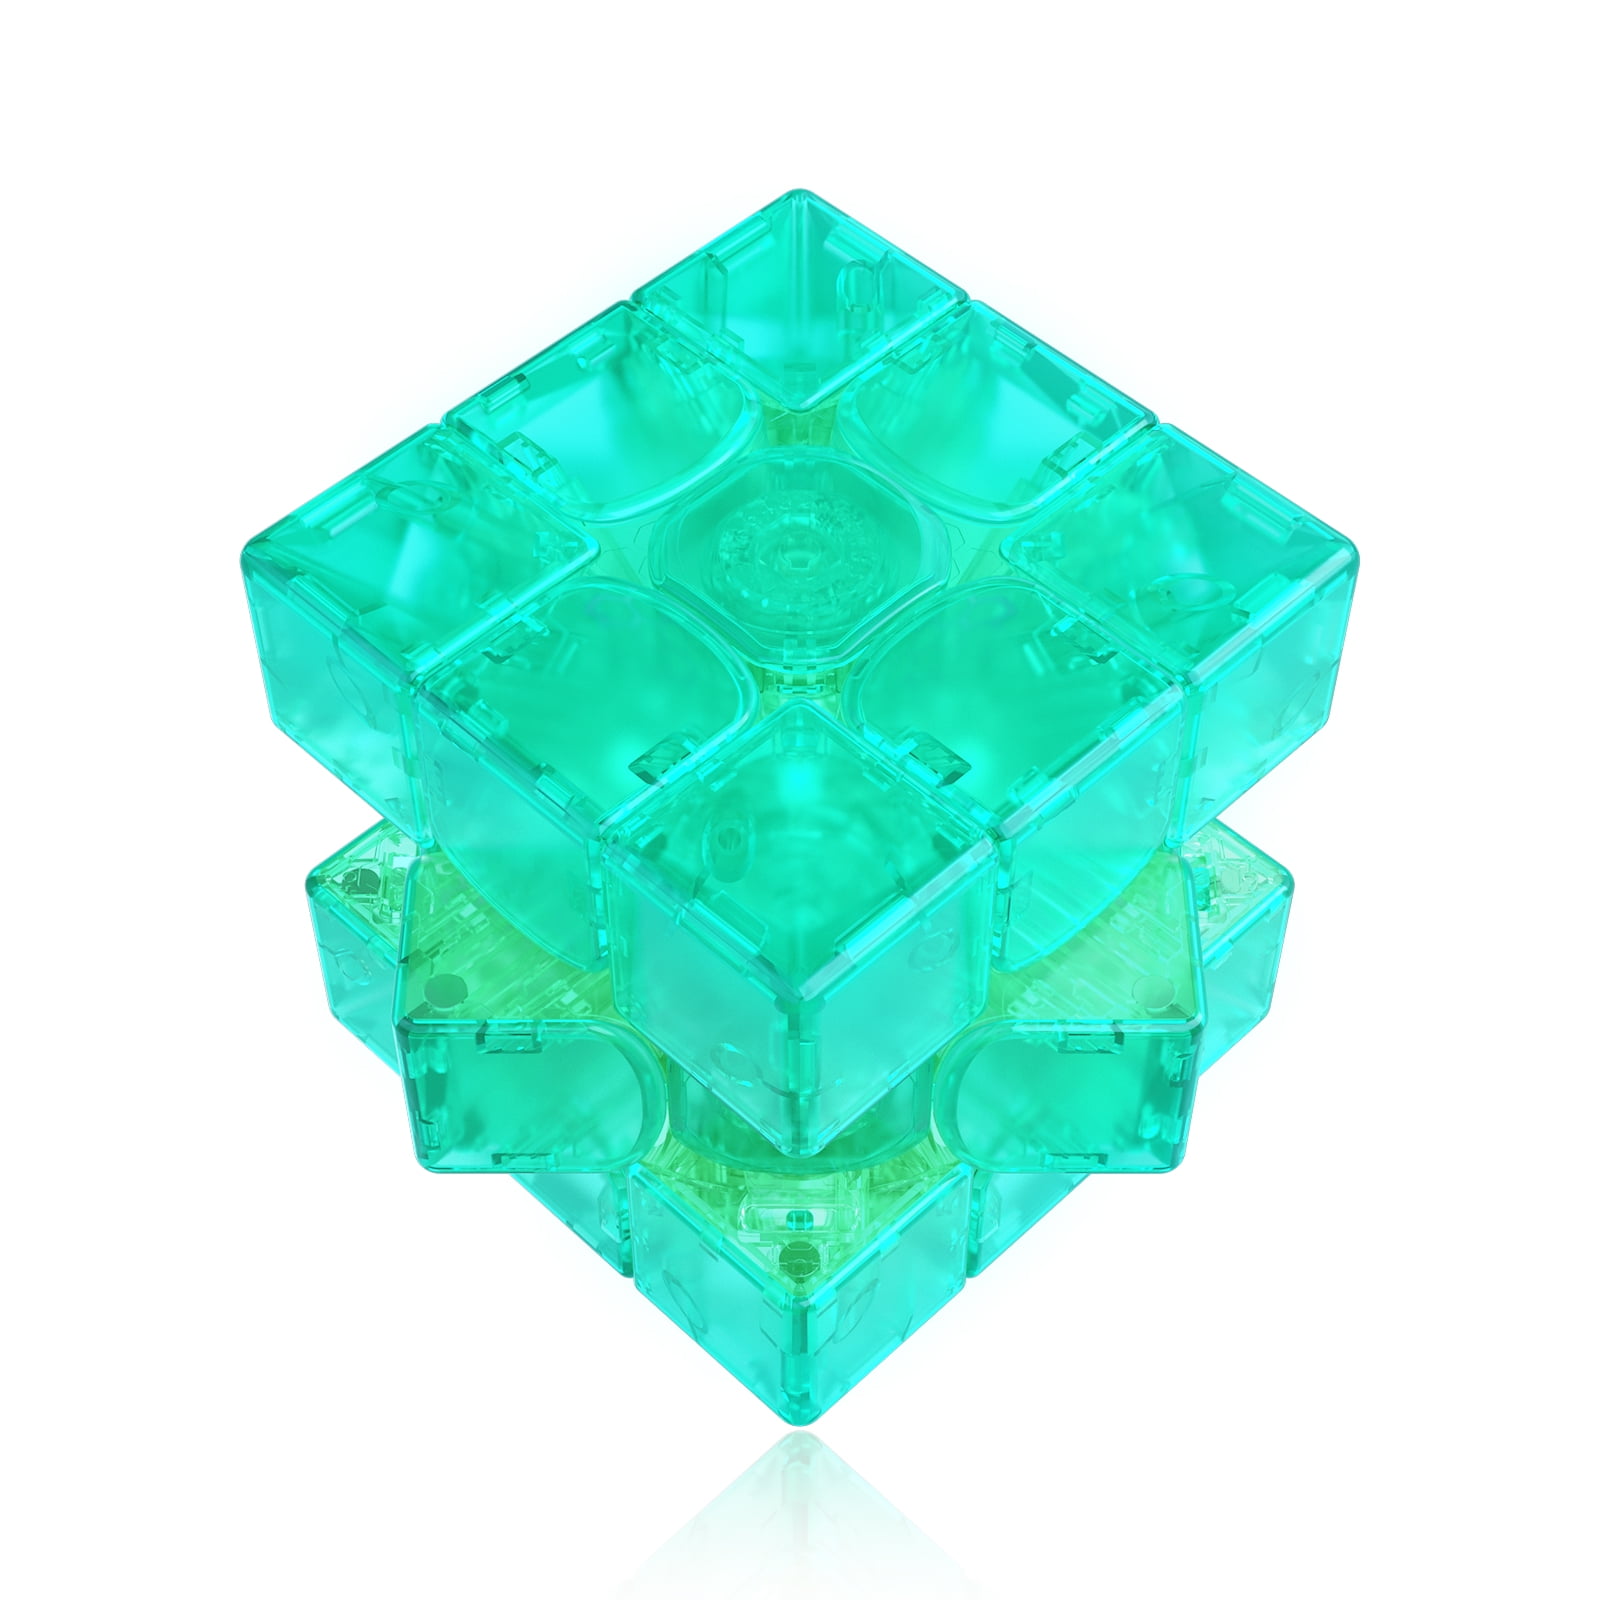 GAN 12 Maglev, Cheering Peacock Cube 3x3 Speed Cube Gans Magic Cube Puzzle  Toys 2021(Limited Edition)